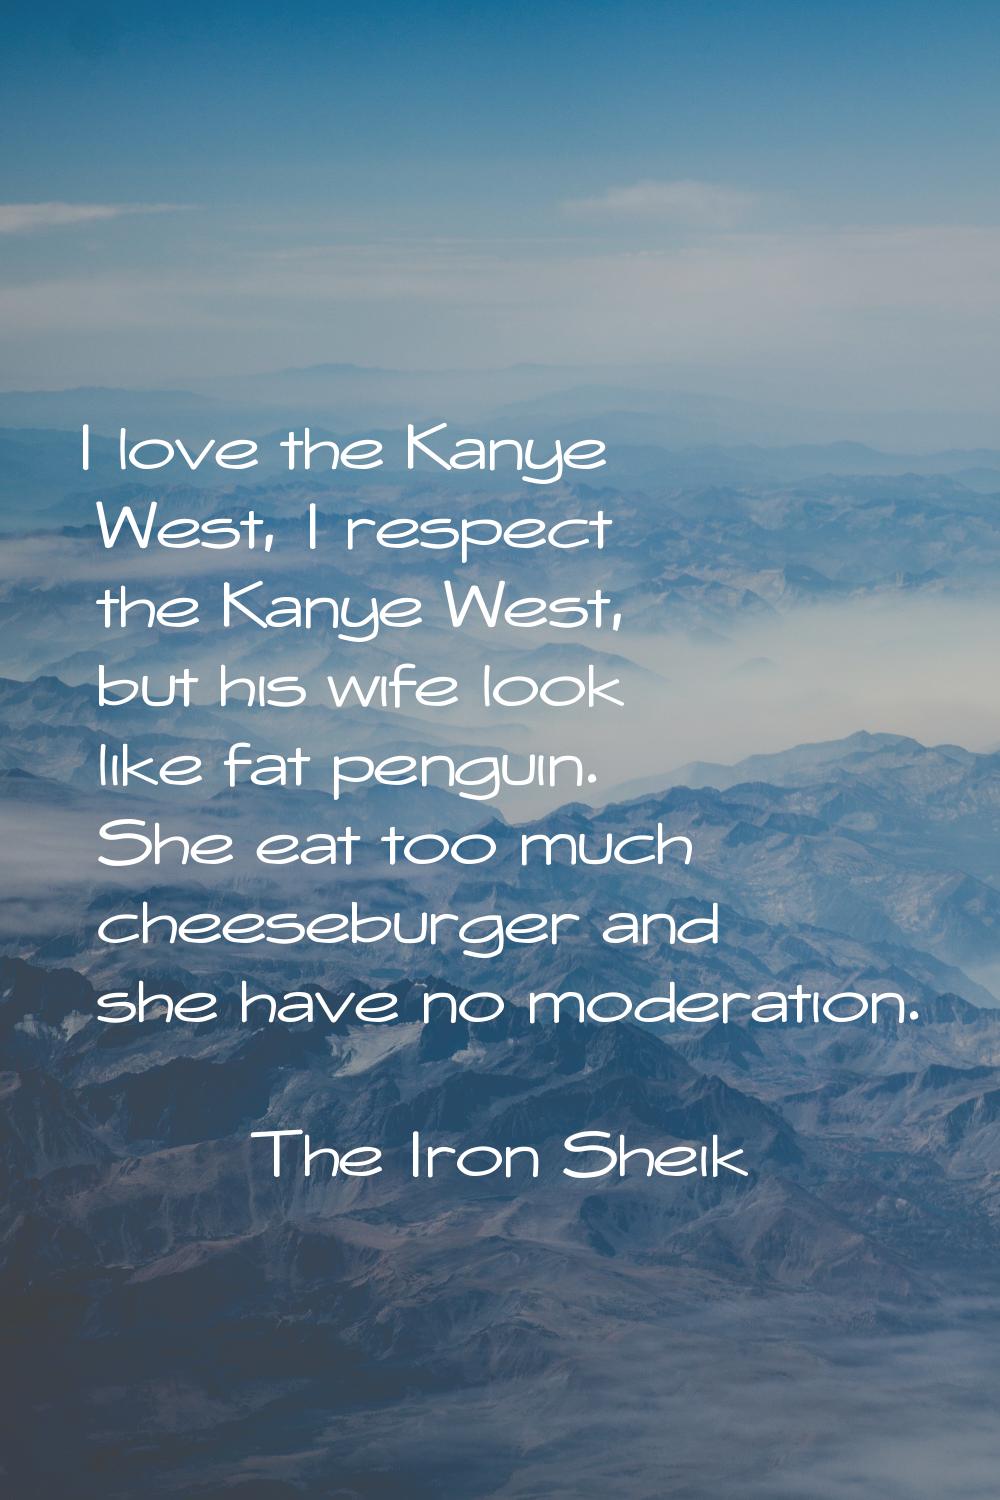 I love the Kanye West, I respect the Kanye West, but his wife look like fat penguin. She eat too mu